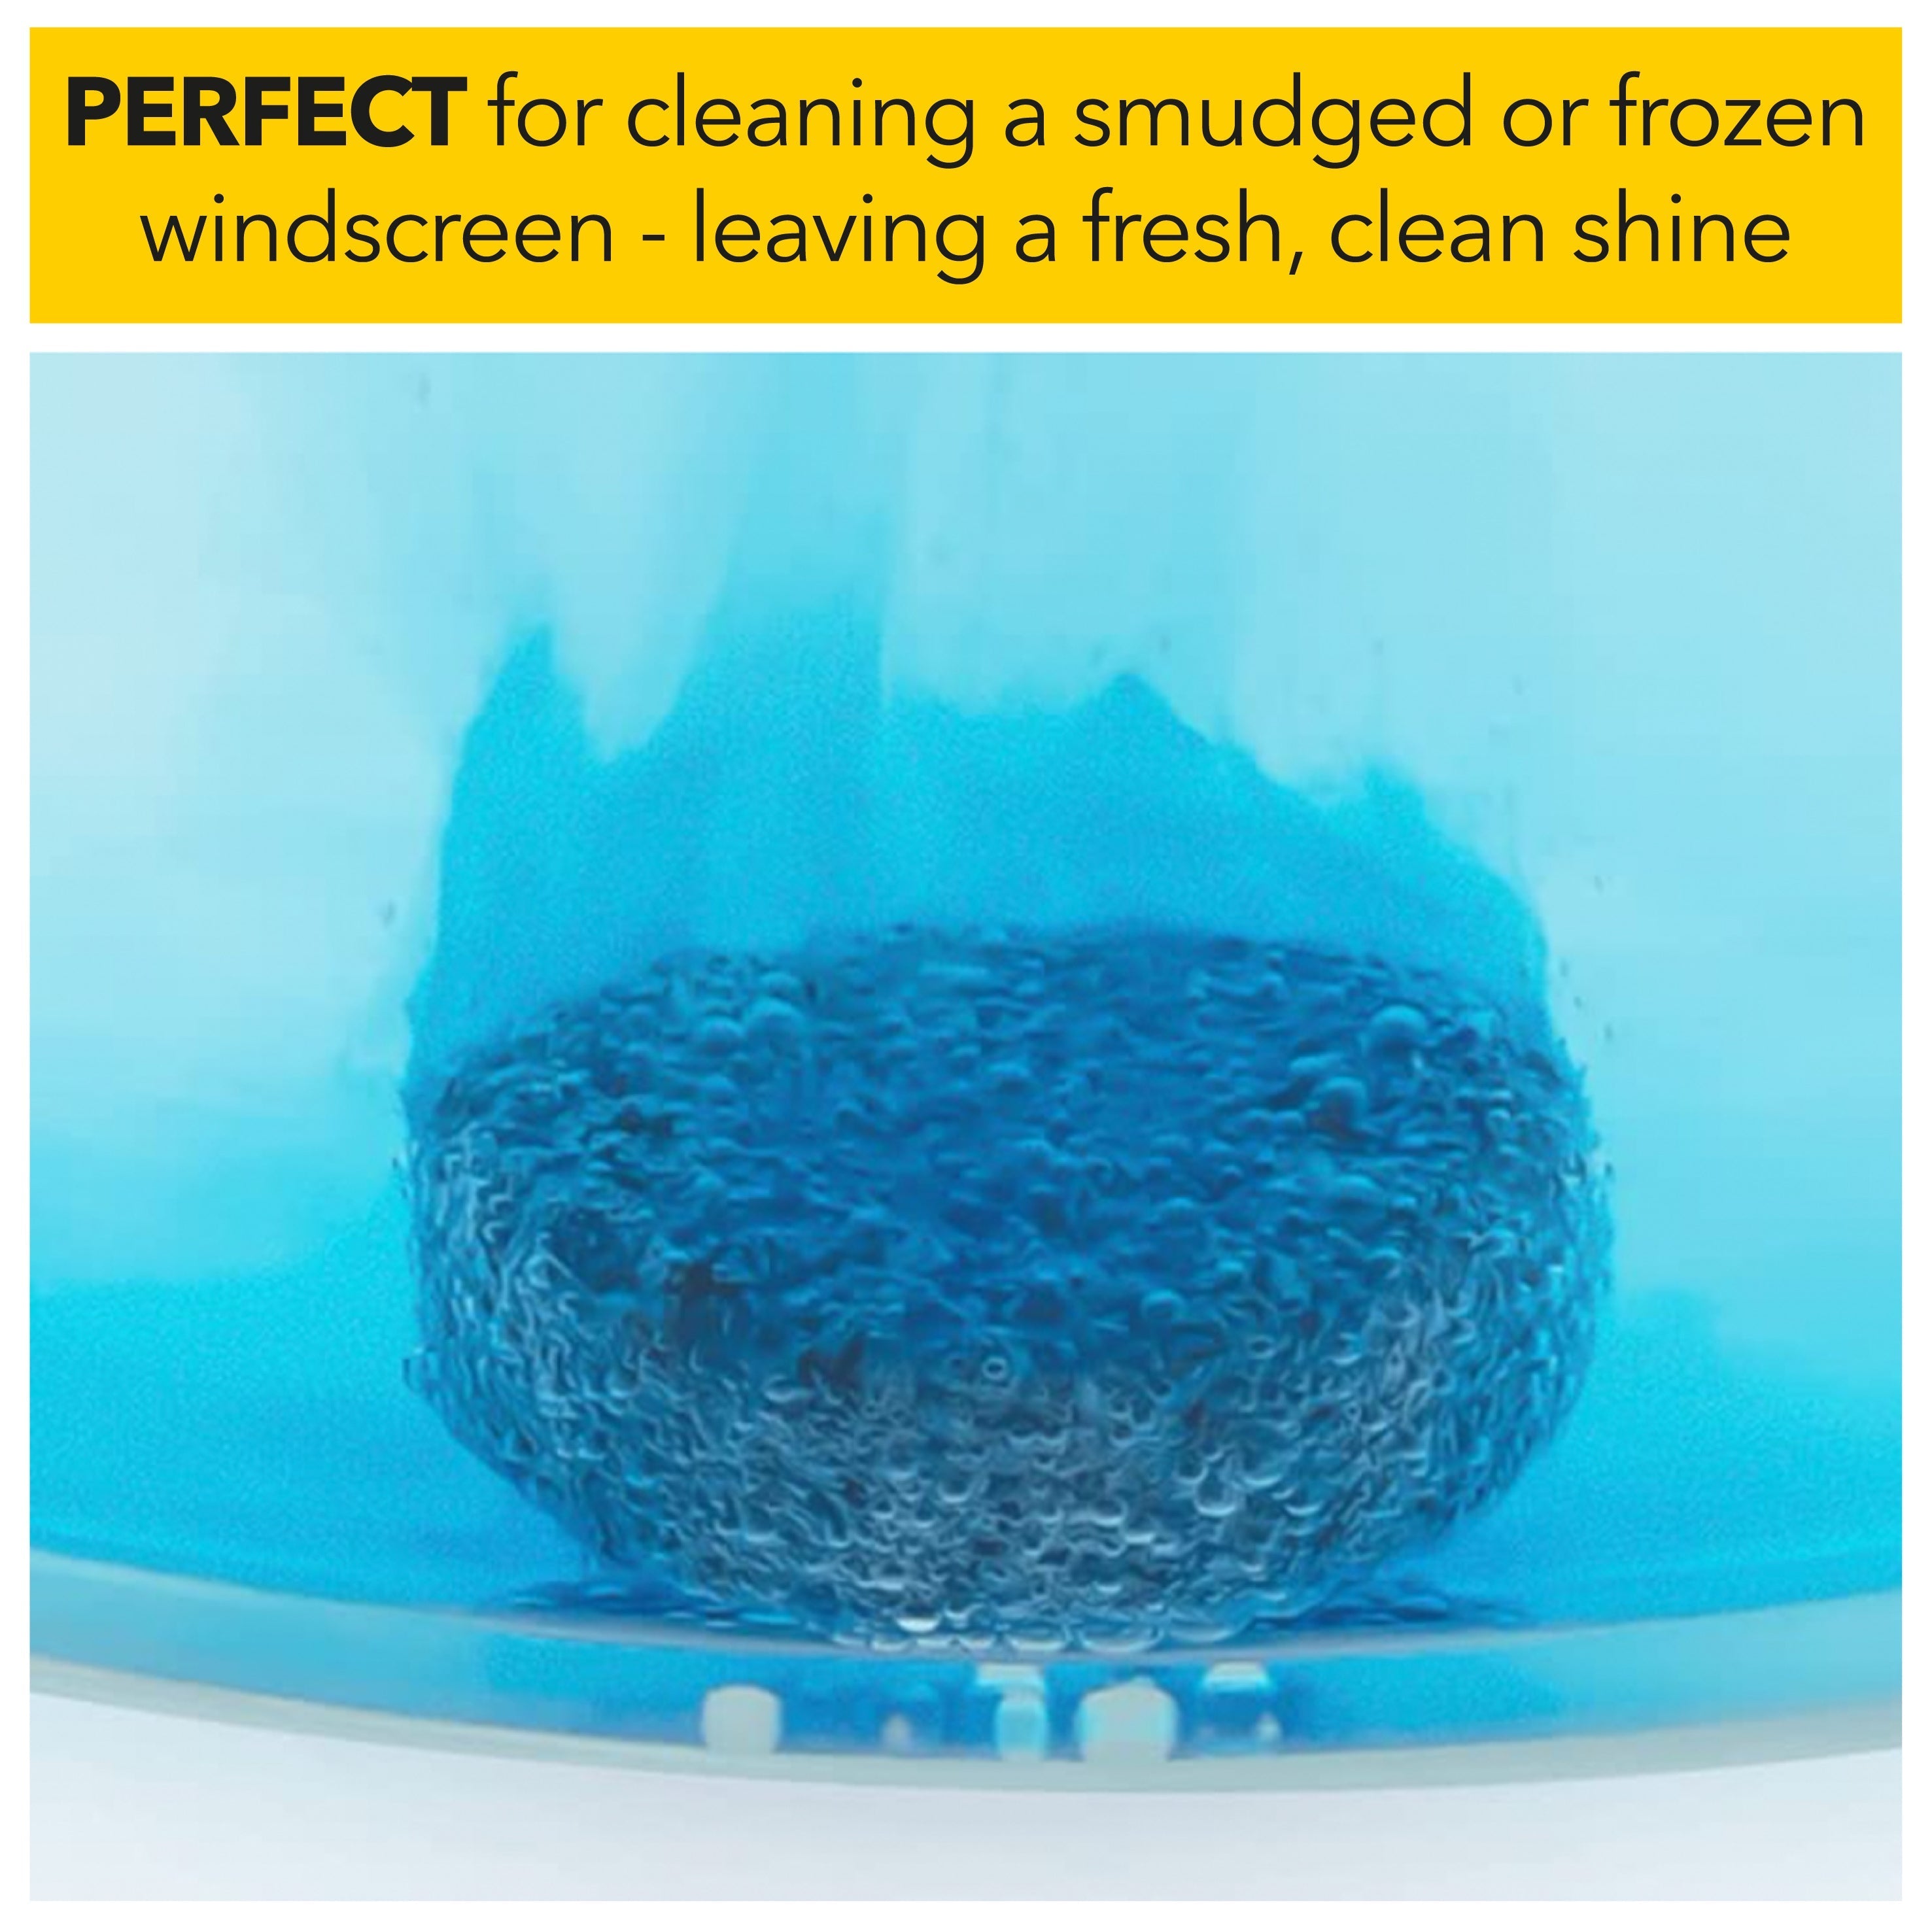 perfect for cleaning a smudged or frozen windscreen - leaving a fresh, clean shine